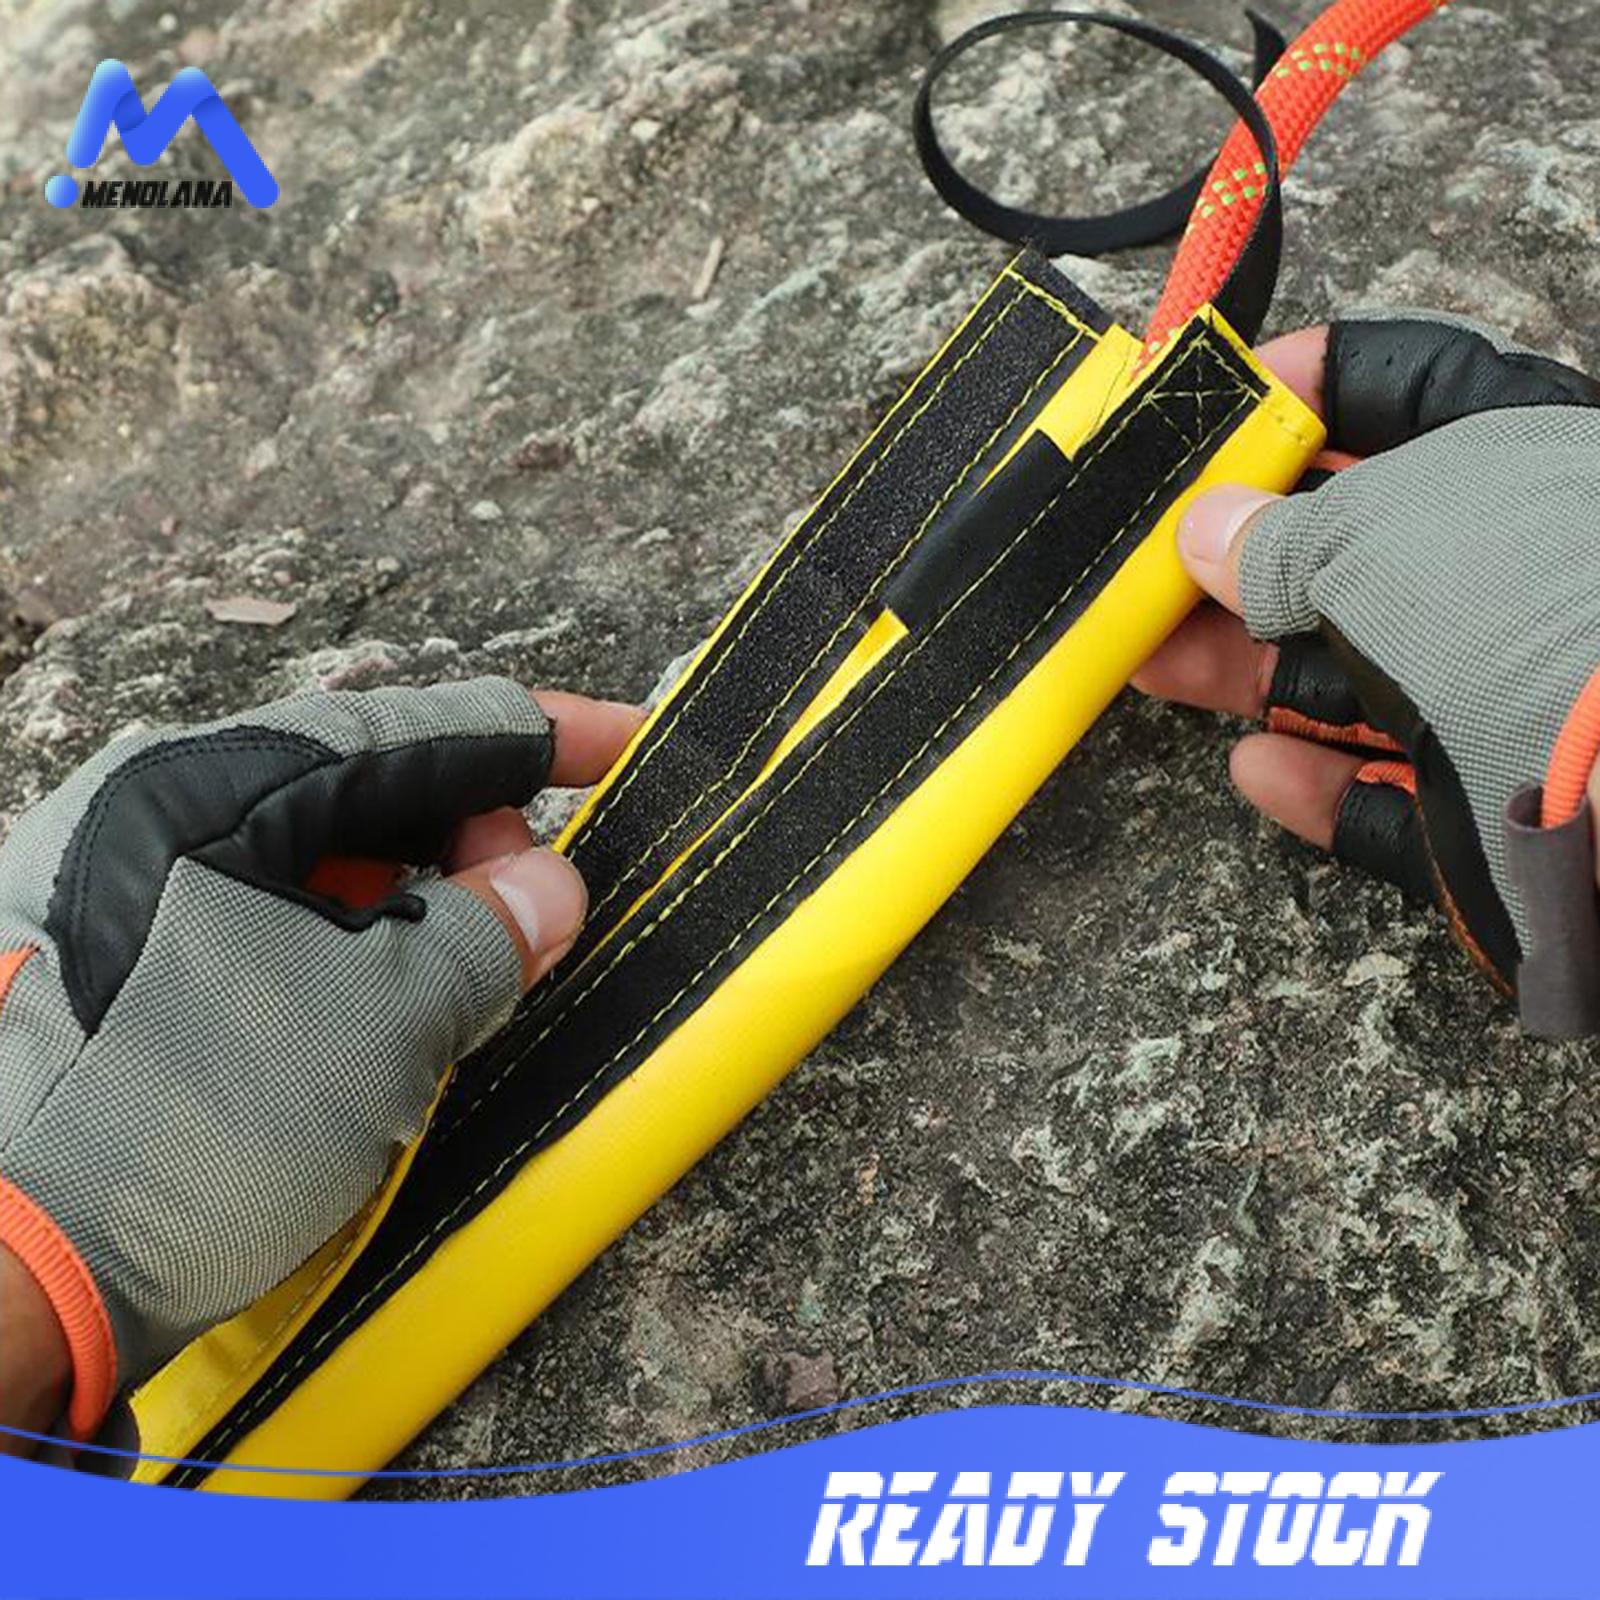 menolana Outdoor Climbing Rope Protector Protective Sleeve for Rappelling